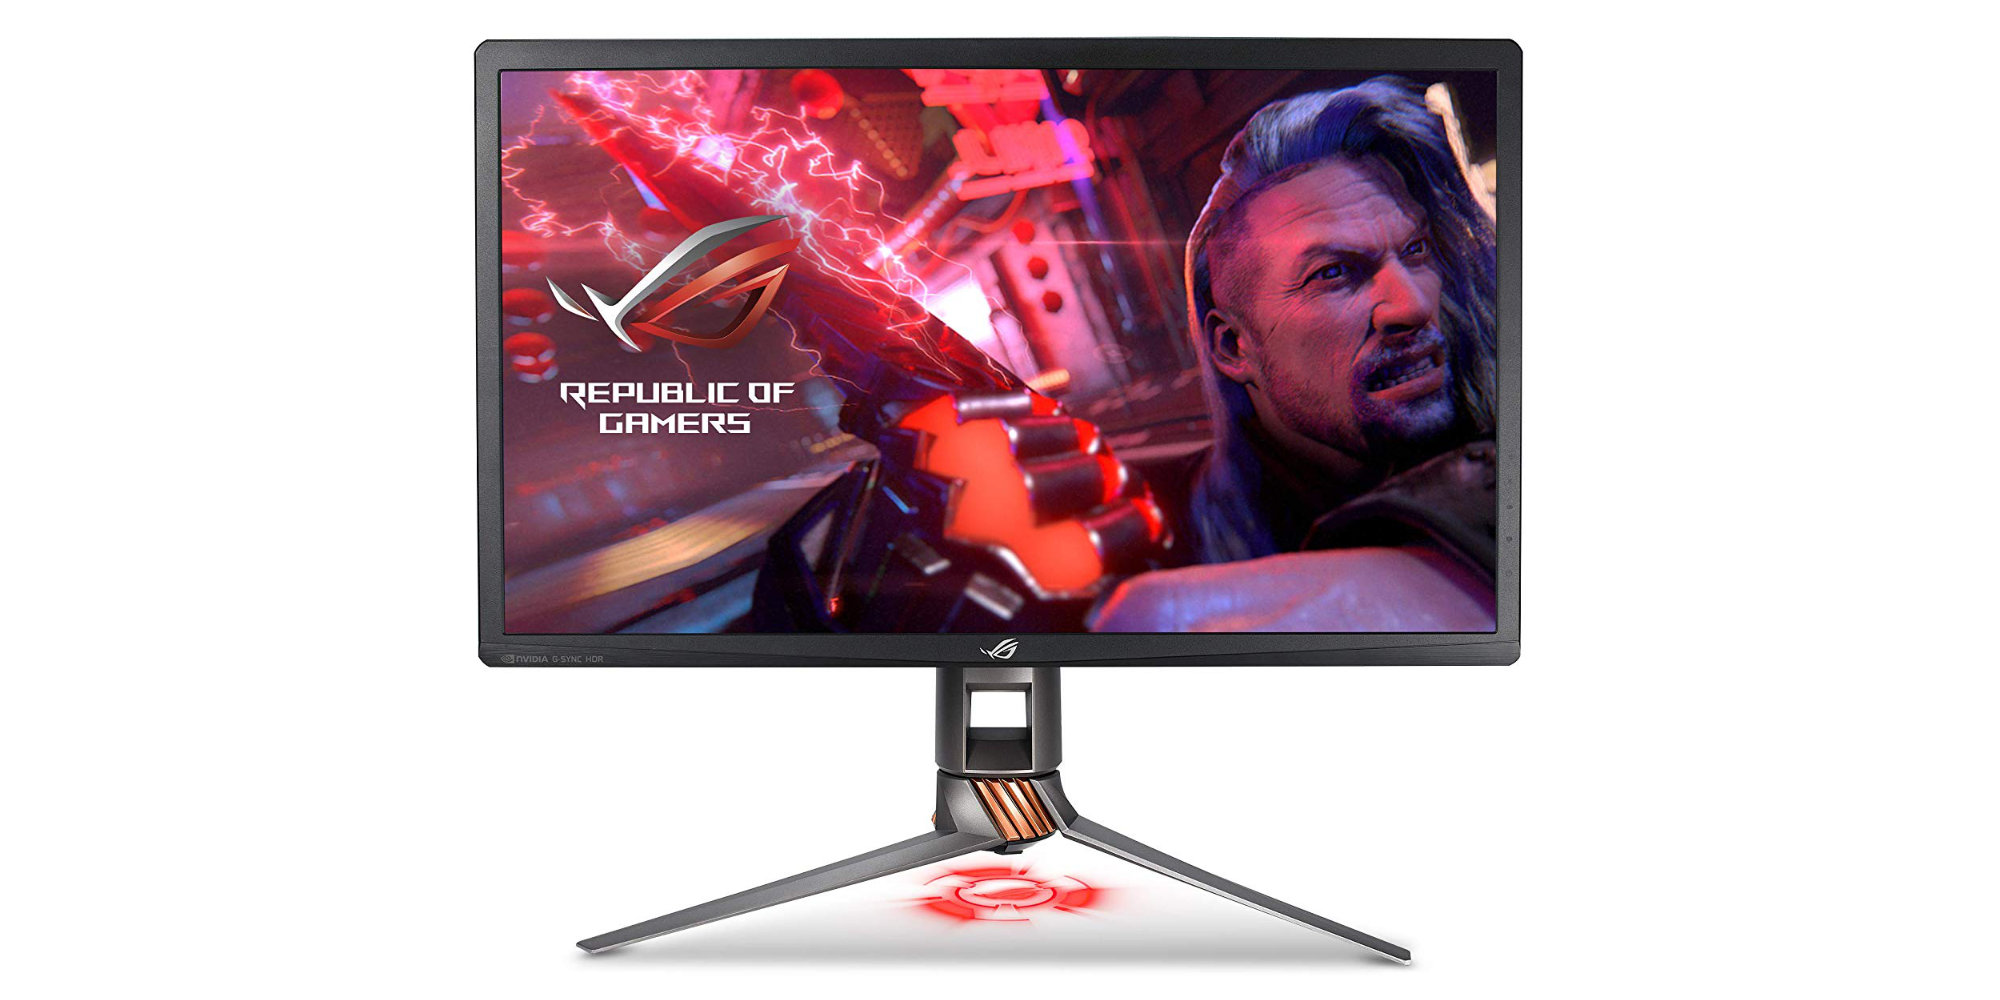 setting the gamut on an asus vs247 monitor